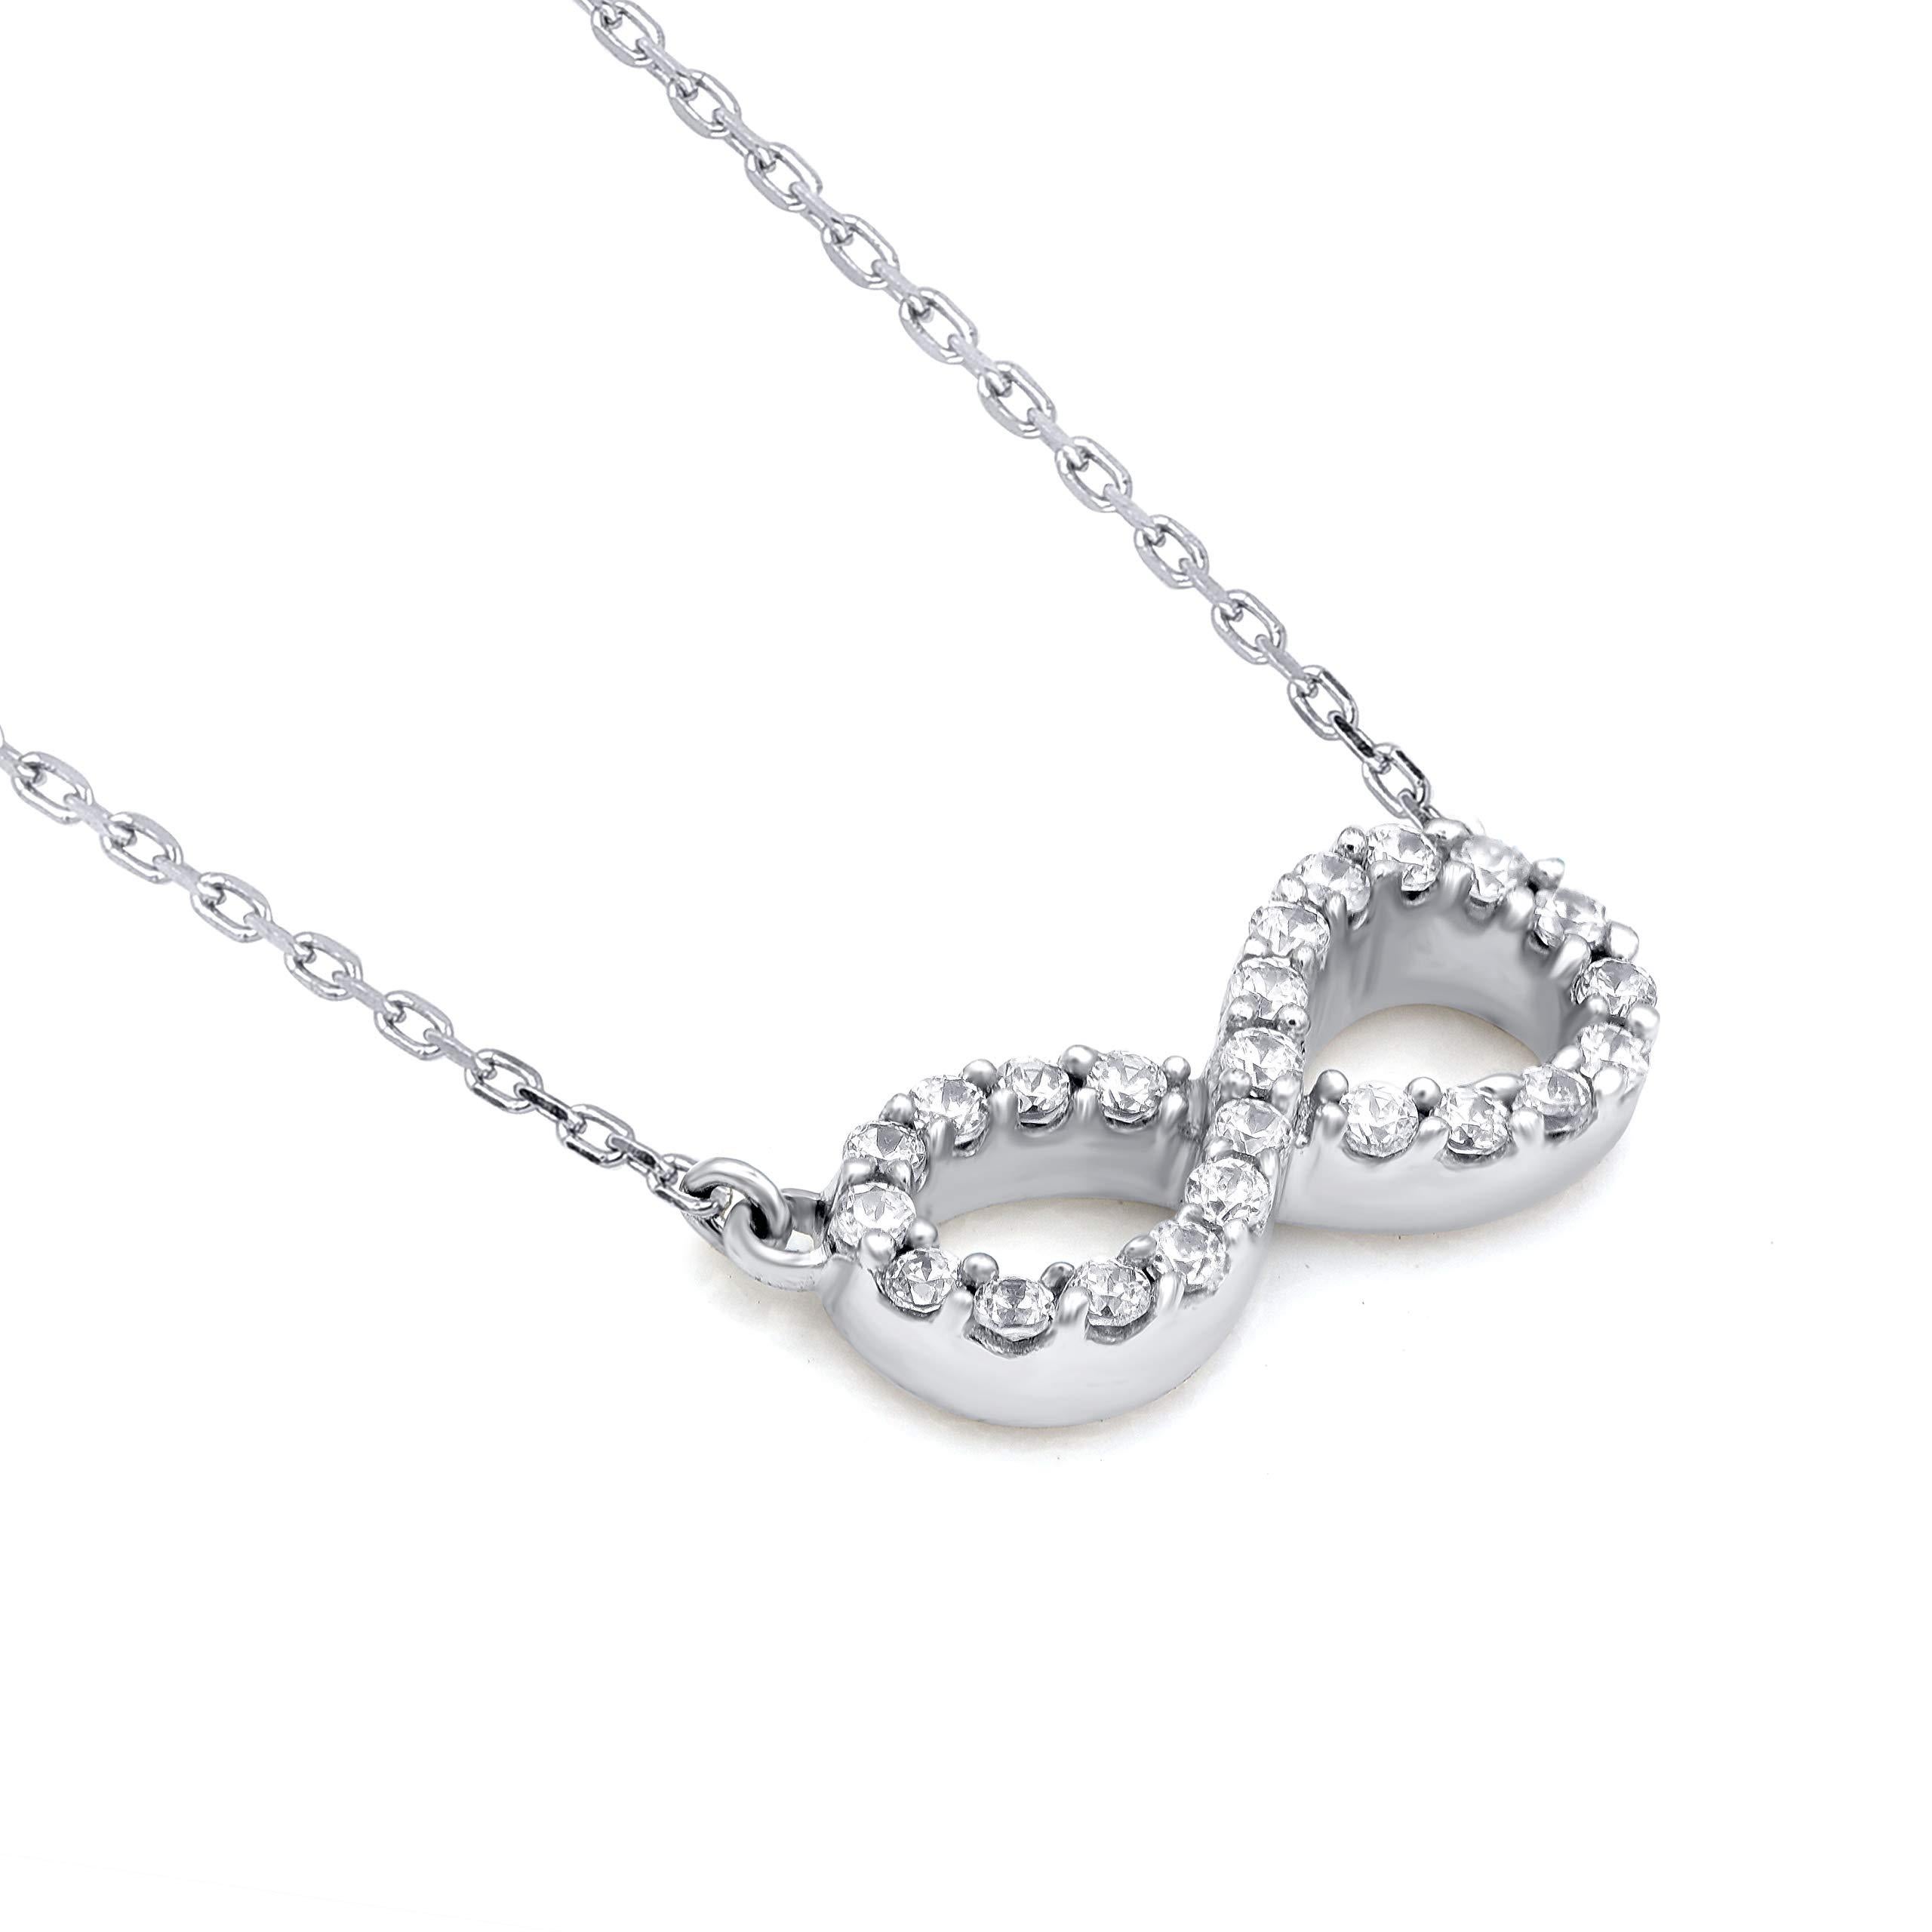 Bring charm to your look with this diamond pendant. The pendant is crafted from 14-karat white gold and features round brilliant cut 23 white diamonds in prong set, H-I color I2 clarity and a high polish finish complete the brilliant sophistication